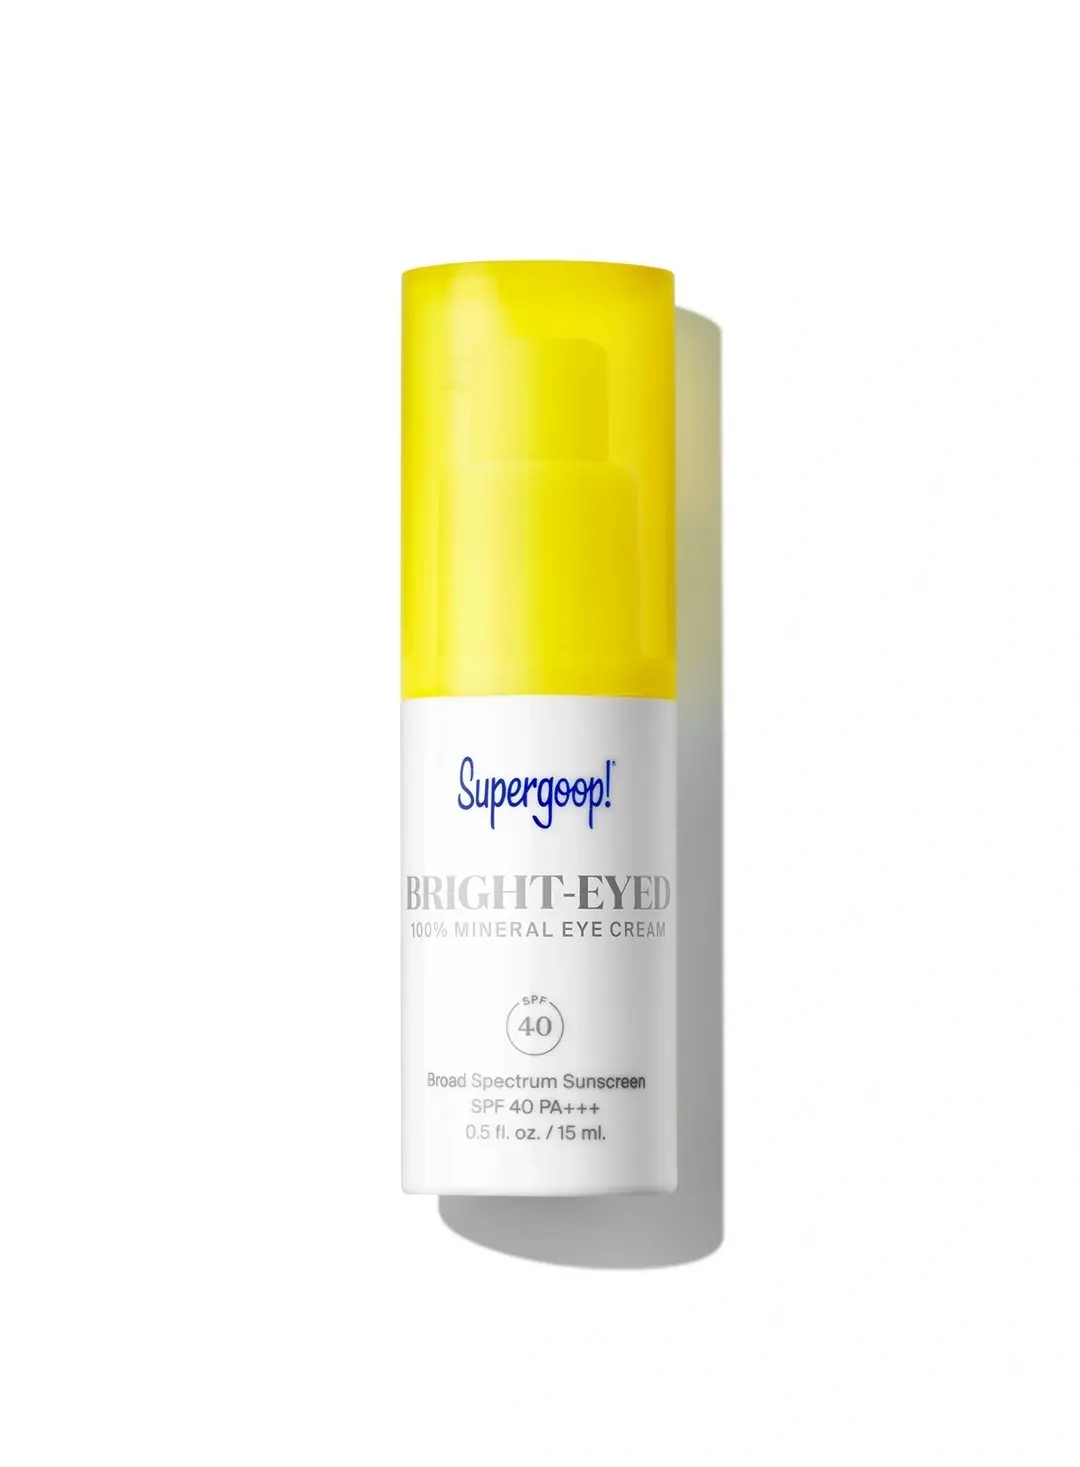 Supergoop! Bright-Eyed 100% Mineral Eye Cream, 0.5 fl oz - SPF 40 PA+++ Hydrating & Illuminating Mineral Sunscreen - Under Eye Cream for Dark Circles & Puffiness - Revives Tired Eyes